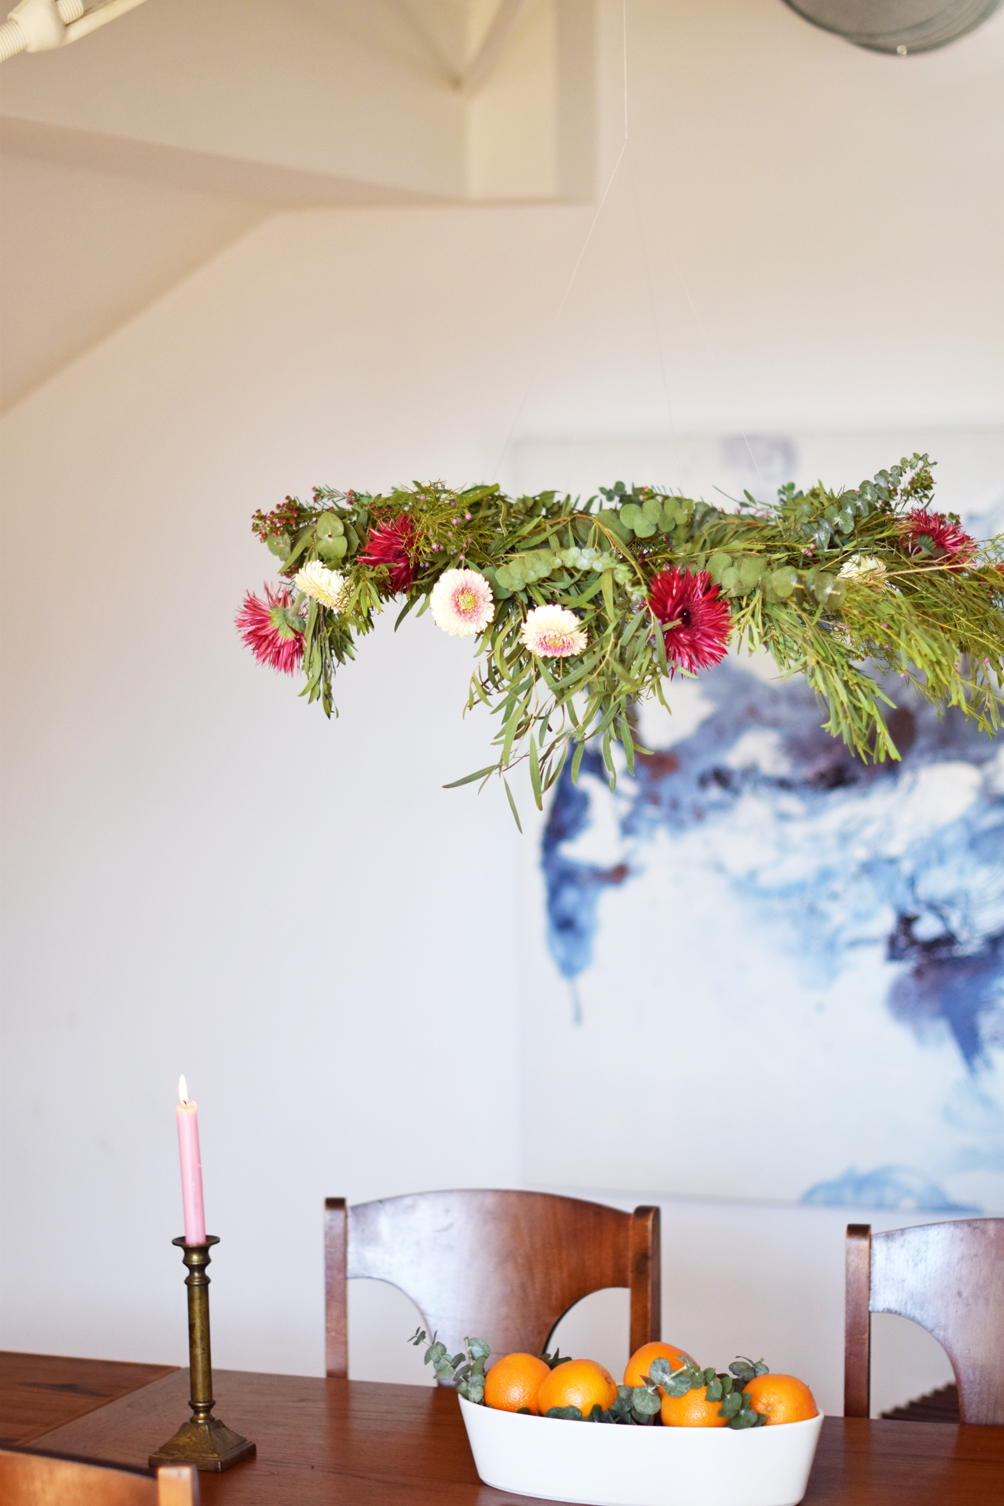 lifestyle blogger Leslie Musser of one brass fox shares an easy and beautiful DIY floral chandelier